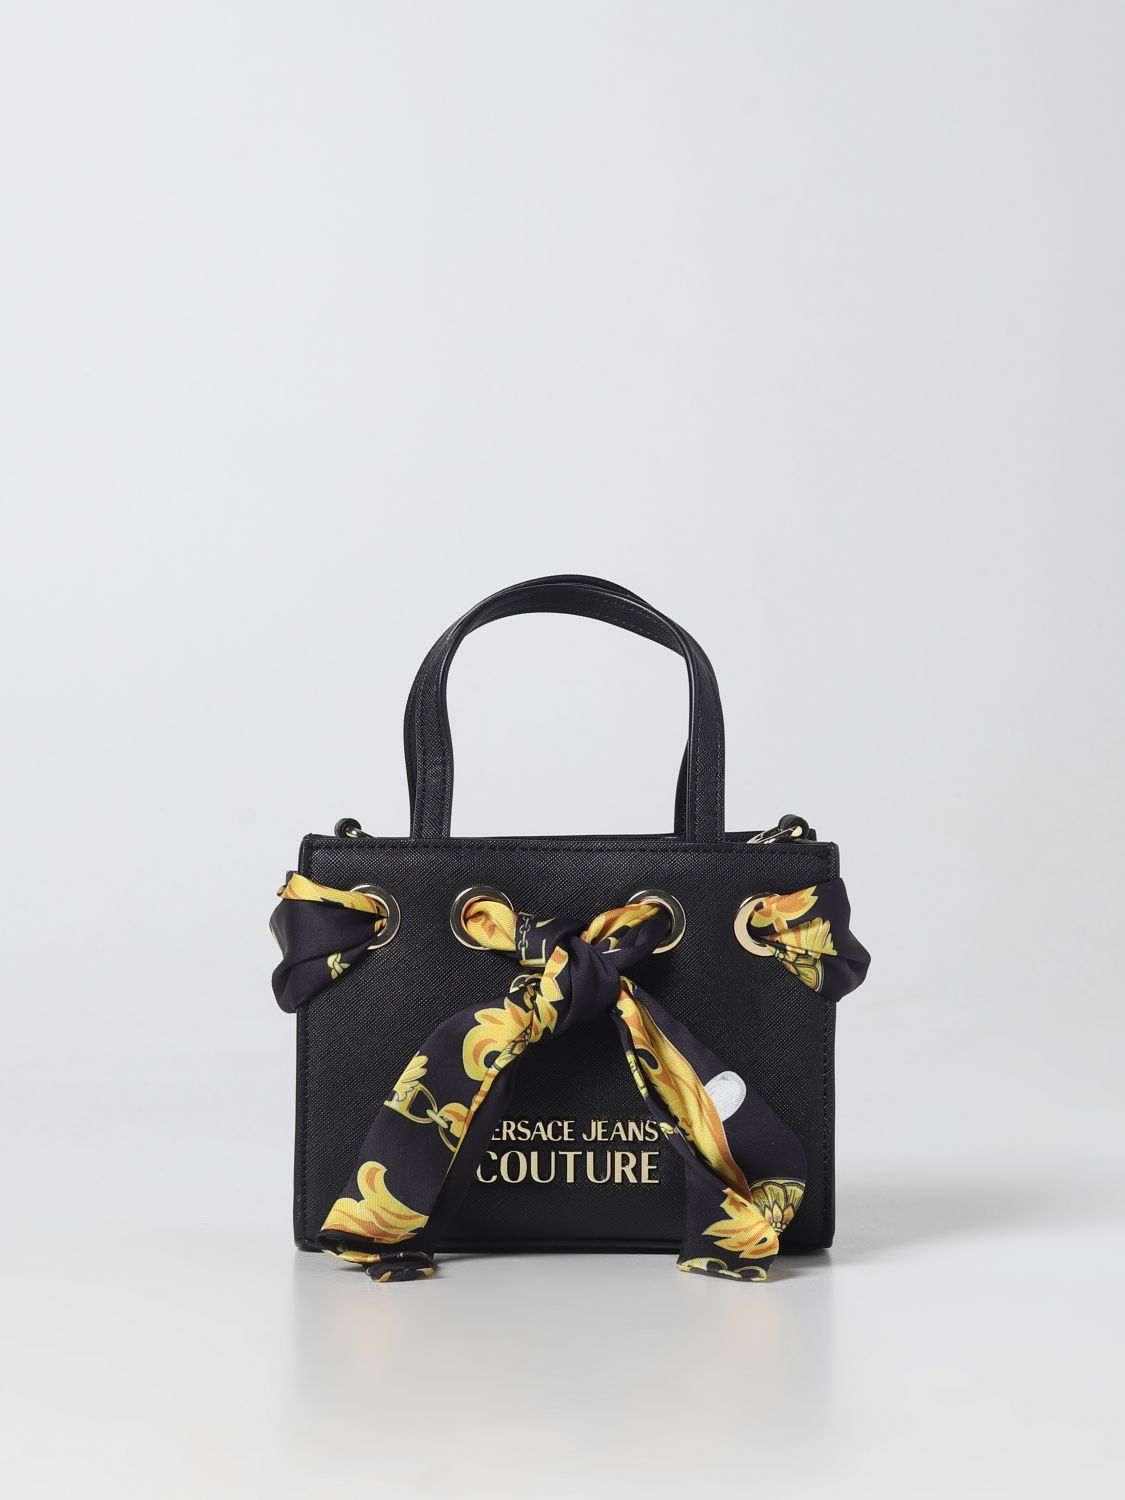 Versace Jeans Couture Bag in Synthetic Leather